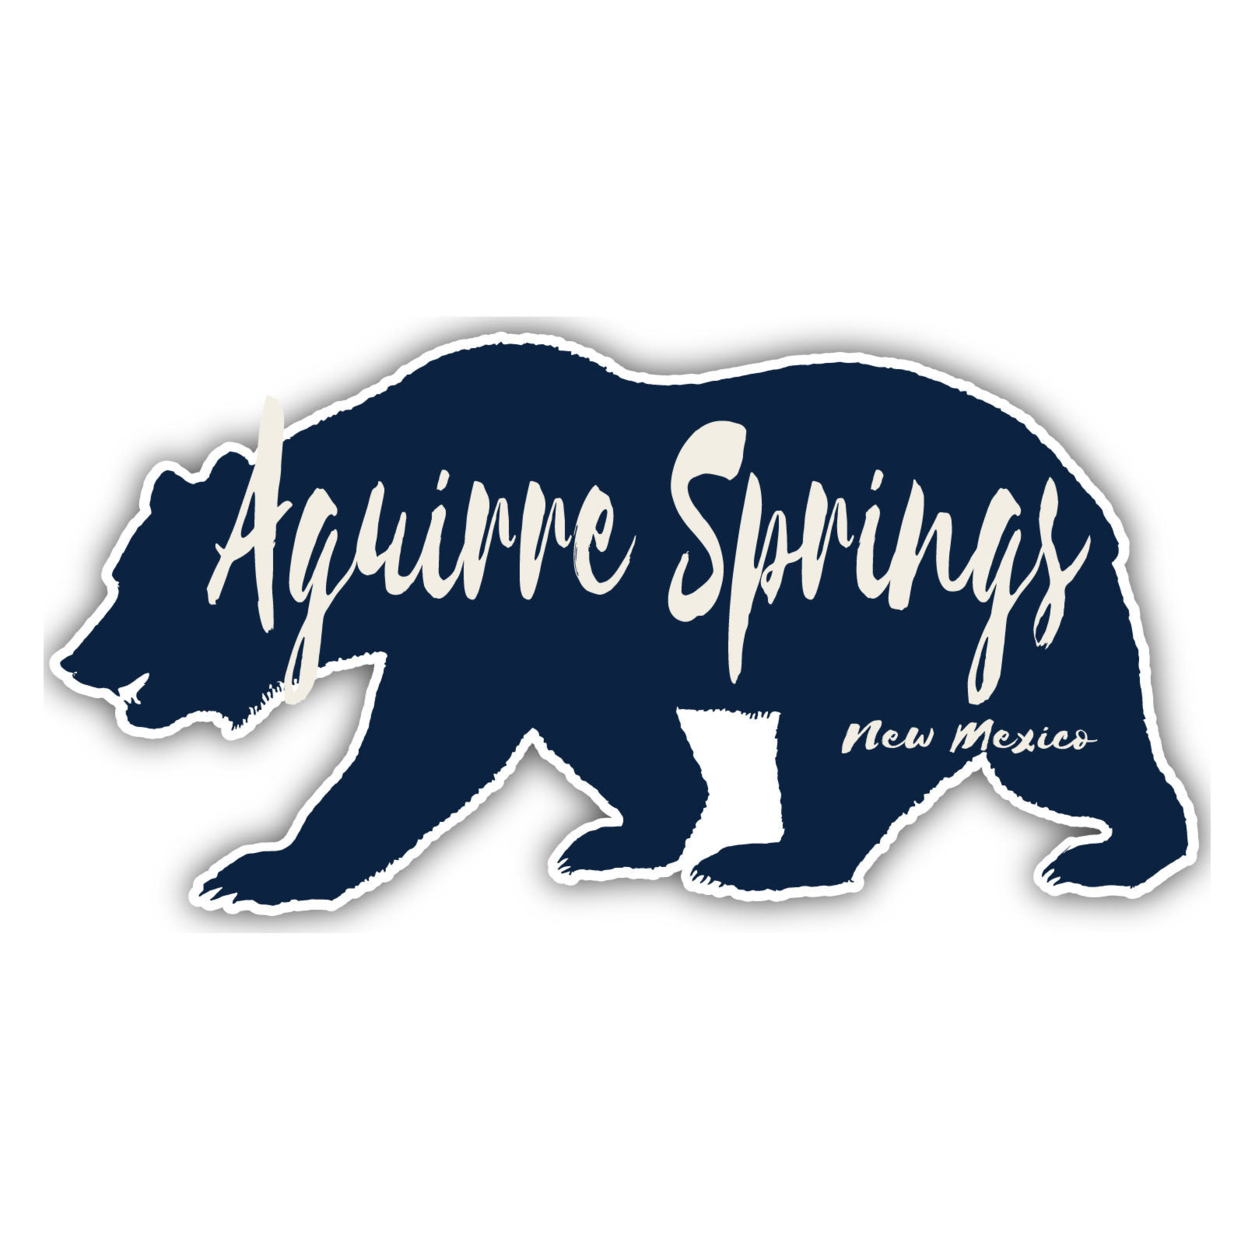 Aguirre Springs New Mexico Souvenir Decorative Stickers (Choose Theme And Size) - 4-Pack, 6-Inch, Bear